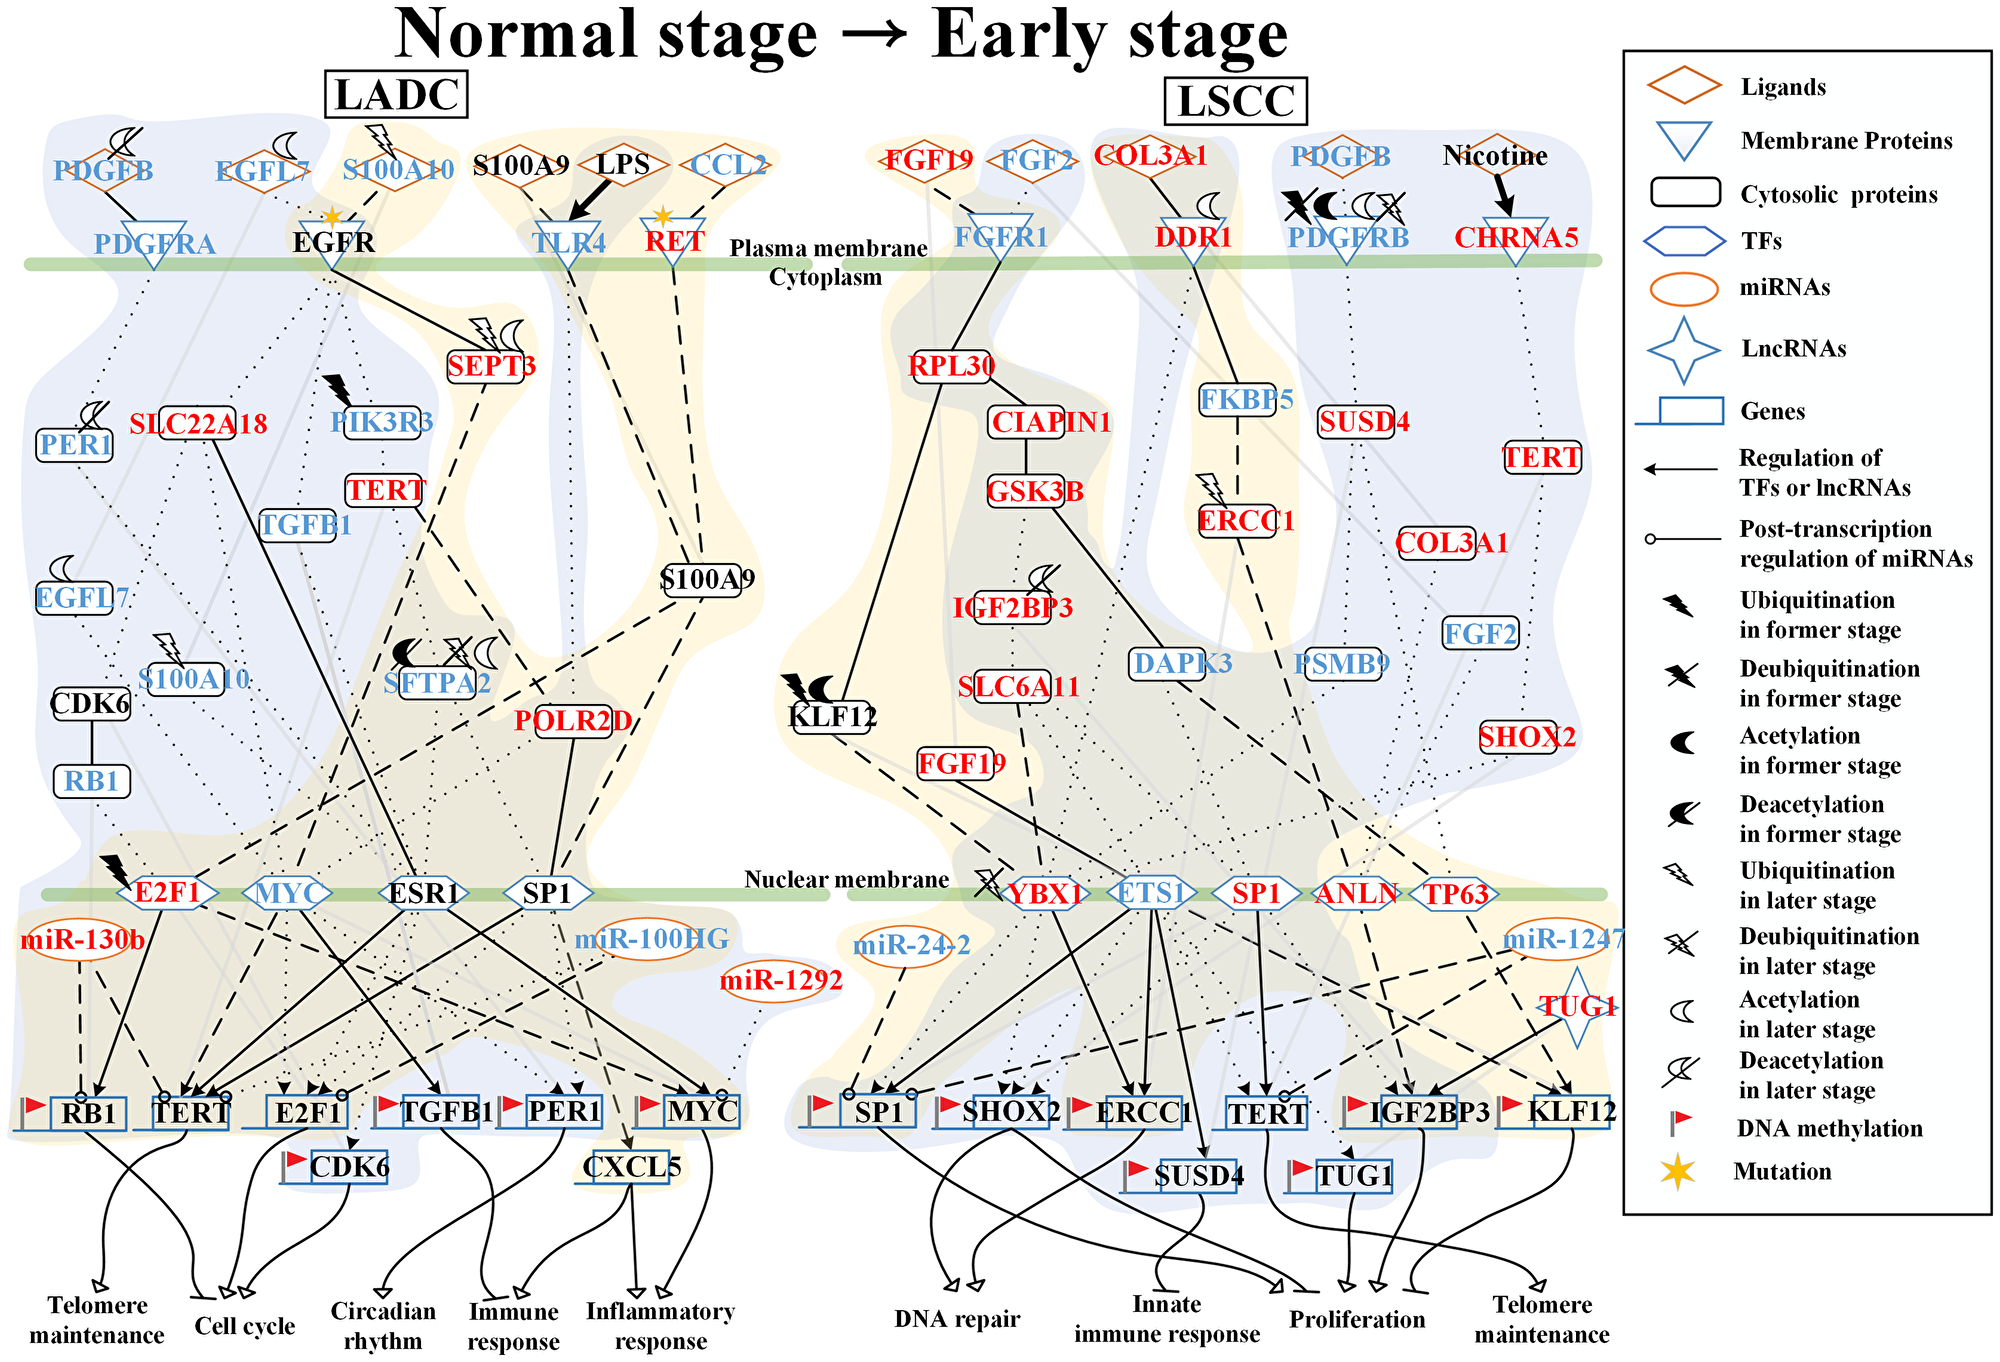 Core signaling pathways extracted from comparing genetic and epigenetic networks (GENs) between normal lung cells and early stage LADC and LSCC.